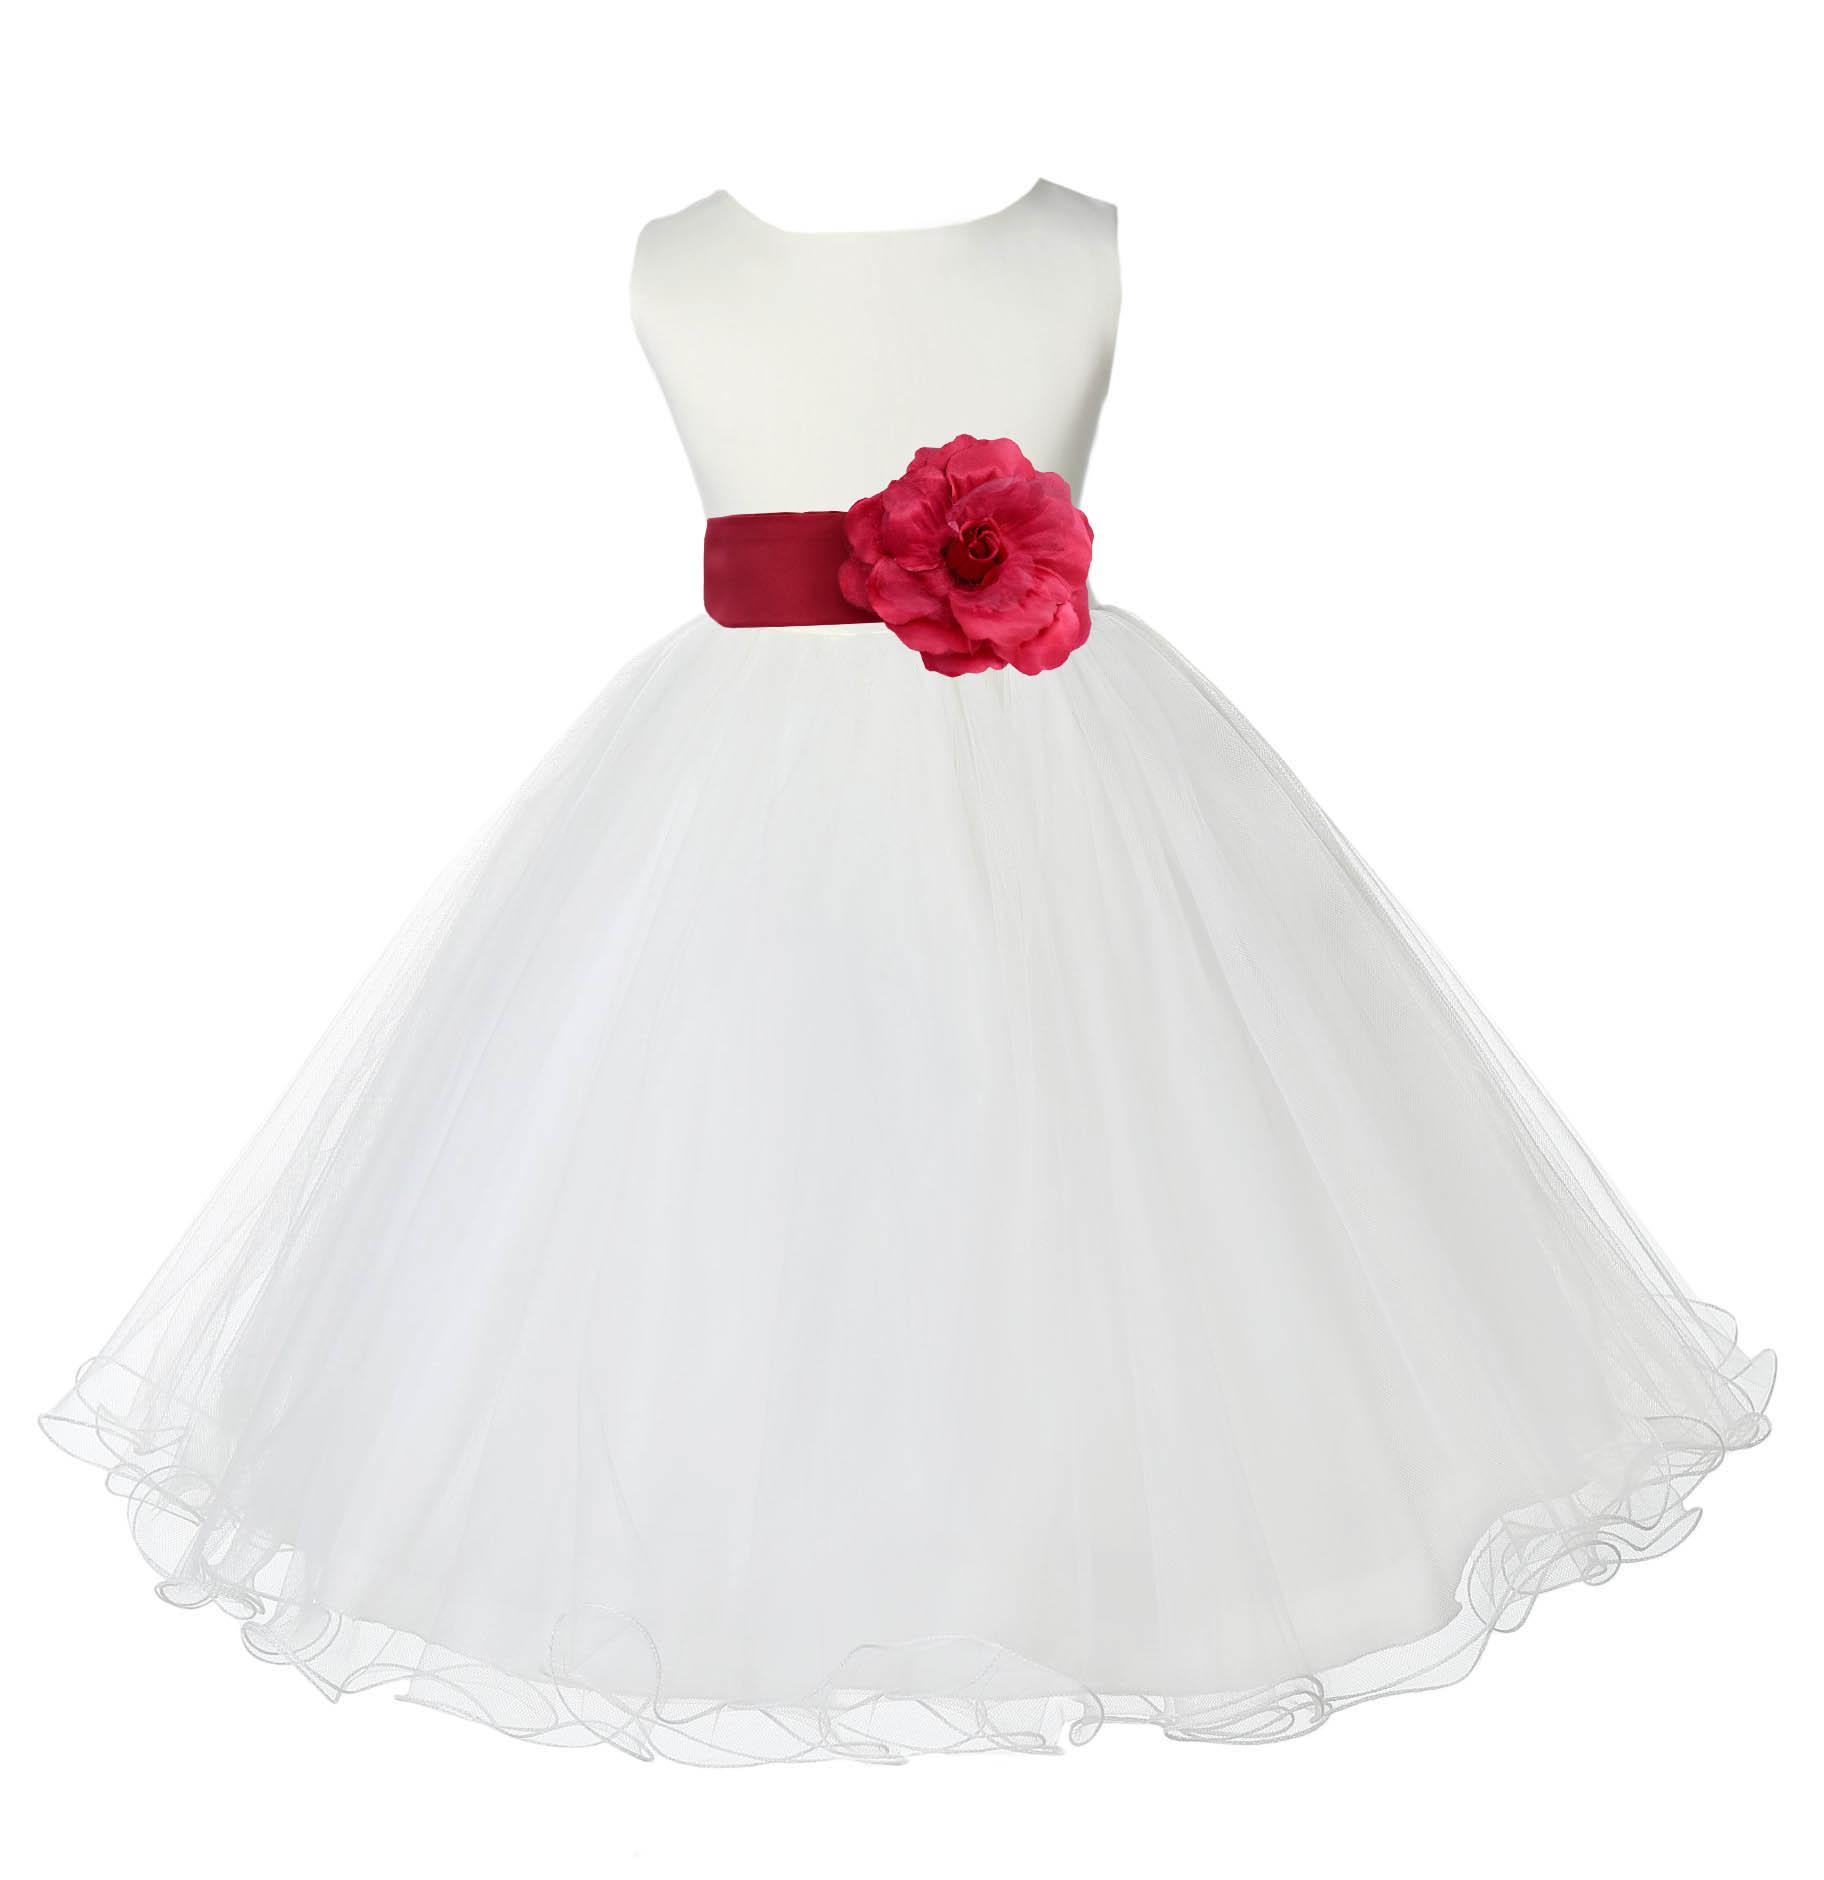 Ekidsbridal Wedding Pageant Ivory Tulle Rattail EdgeFlower Girl Dress Toddler Special Occasions Bridesmaid Handmade 829t